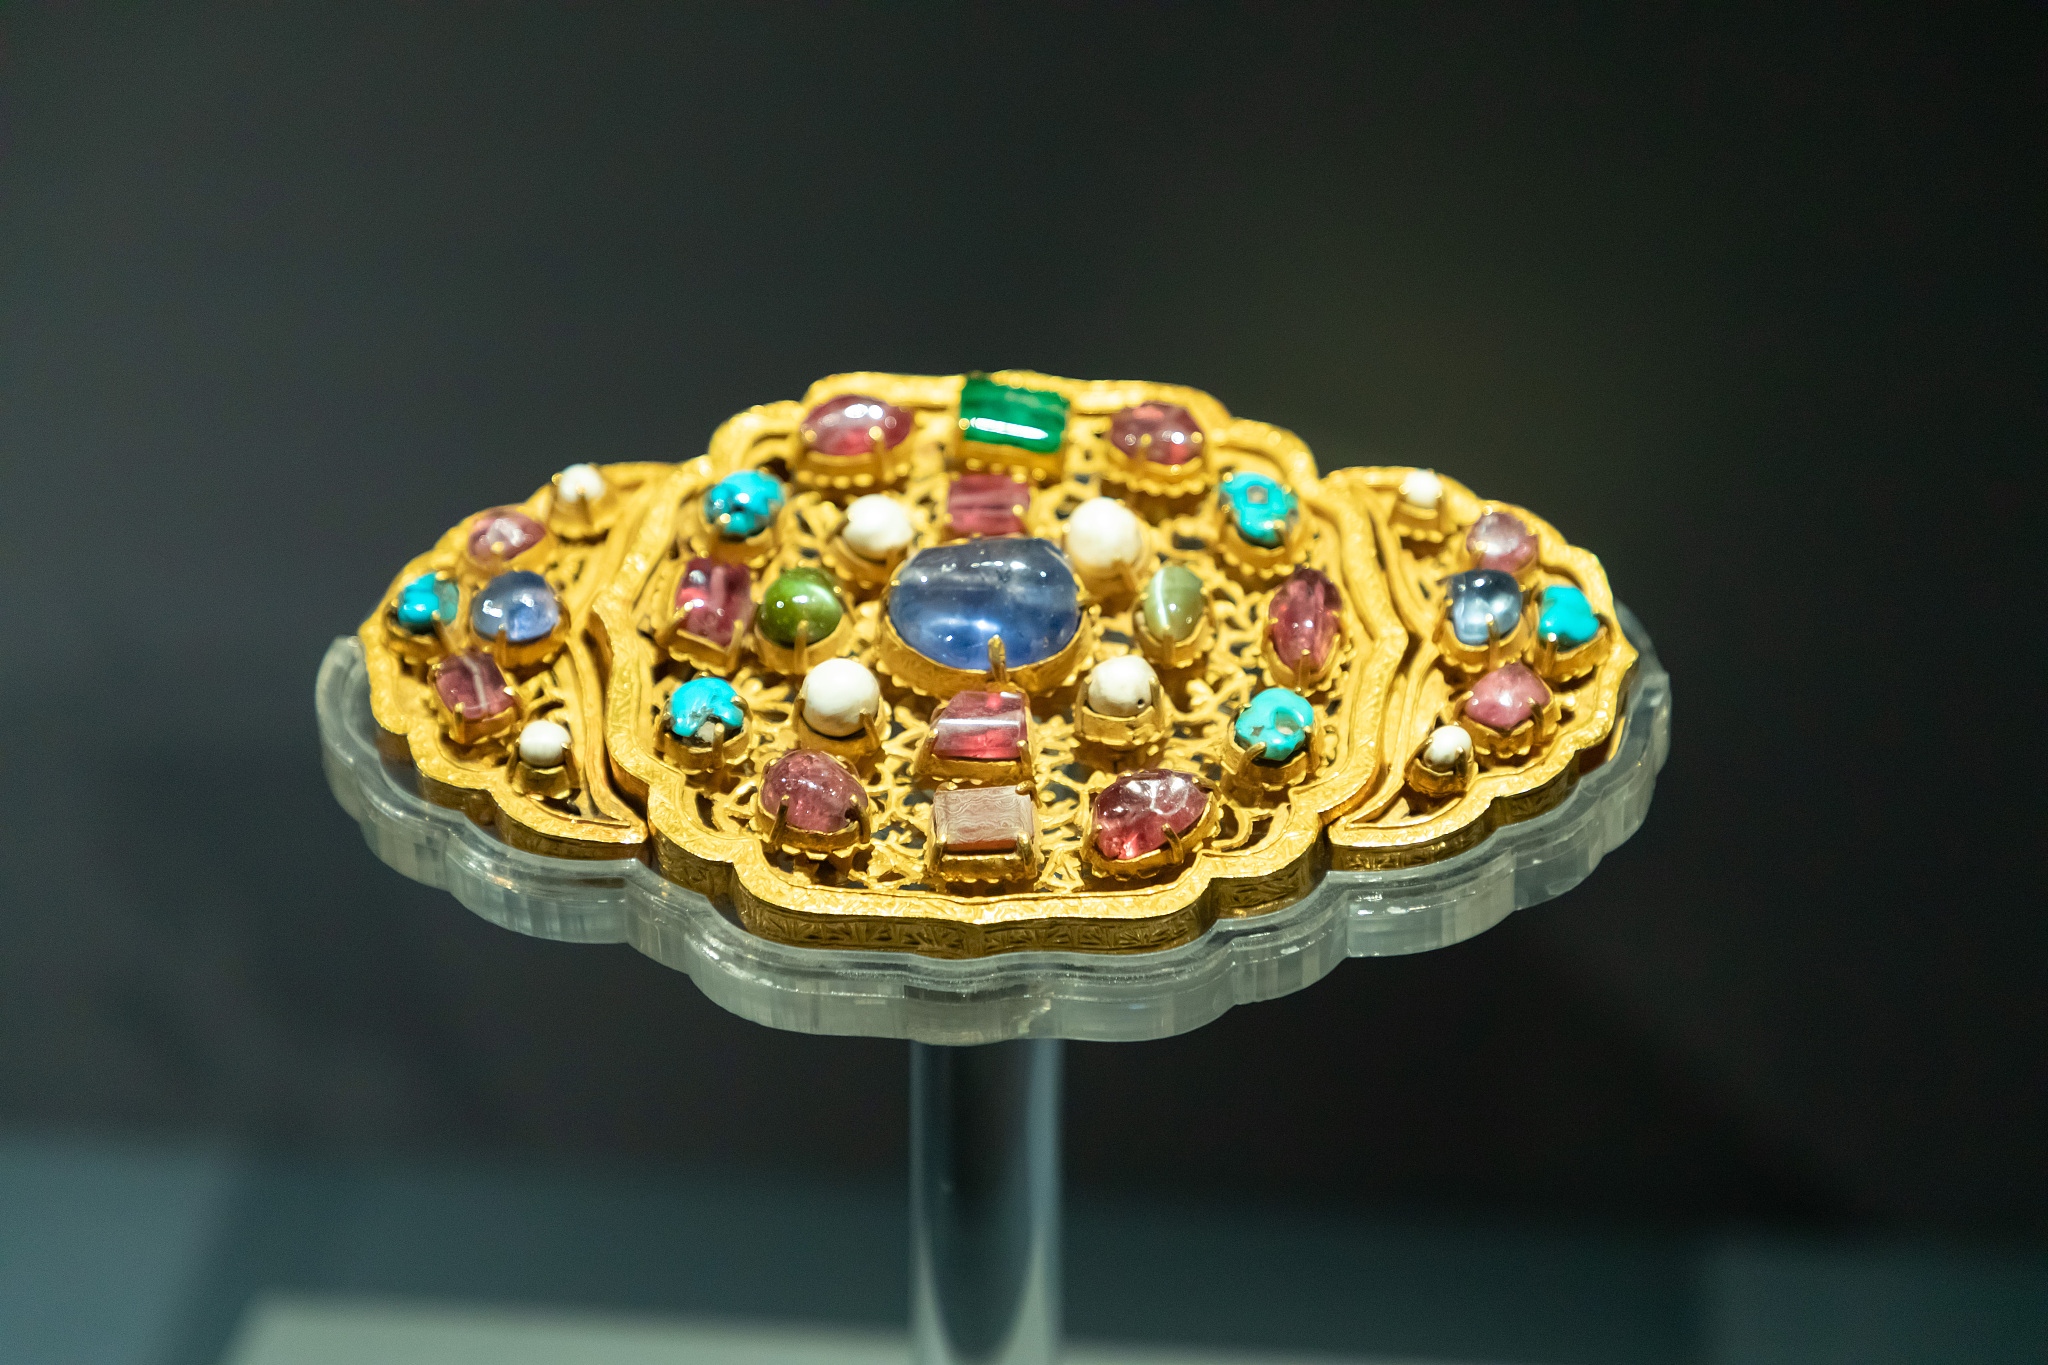 A gold belt decoration adorned with gems from the Ming Dynasty (1368-1644) is on display at an exhibition showcasing exquisite cultural relics from Shandong Province. /CFP